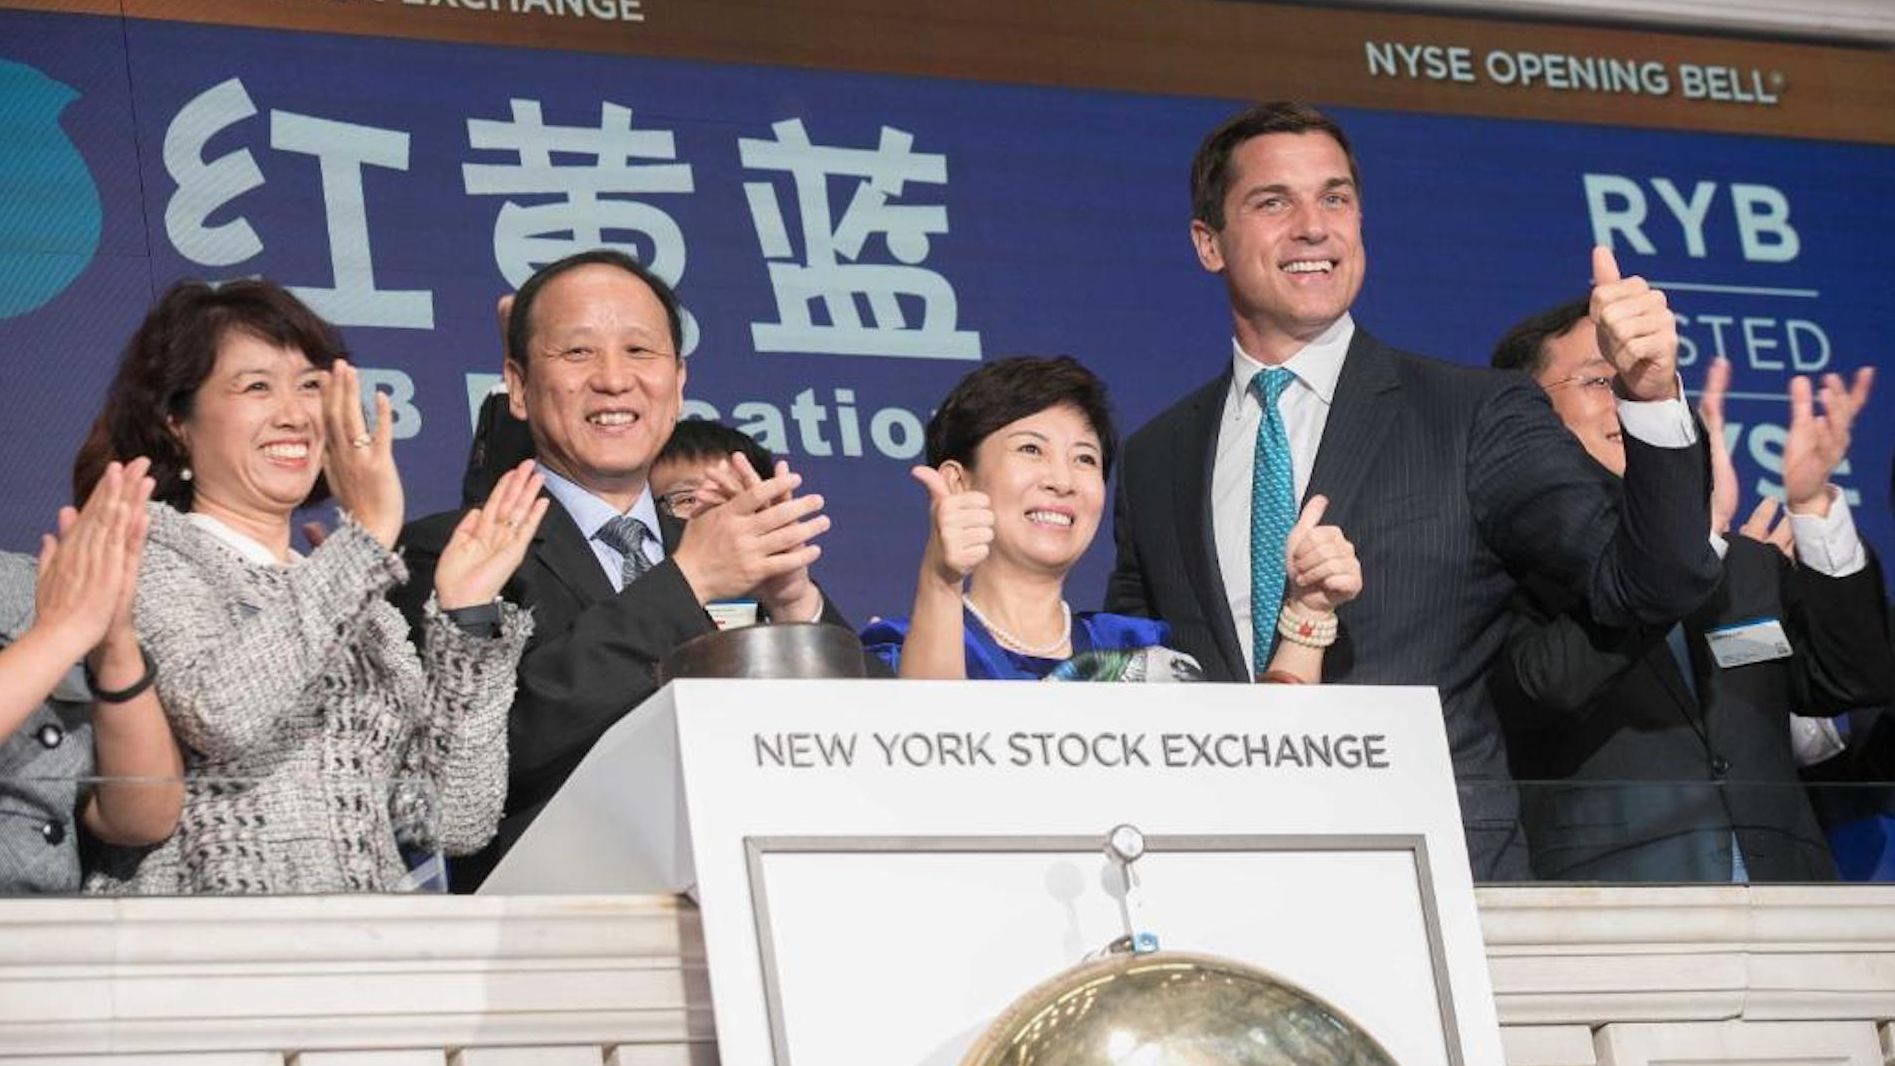 RYB Education representatives ring the New York Stock Exchange opening bell on the company's first day of trading in September.